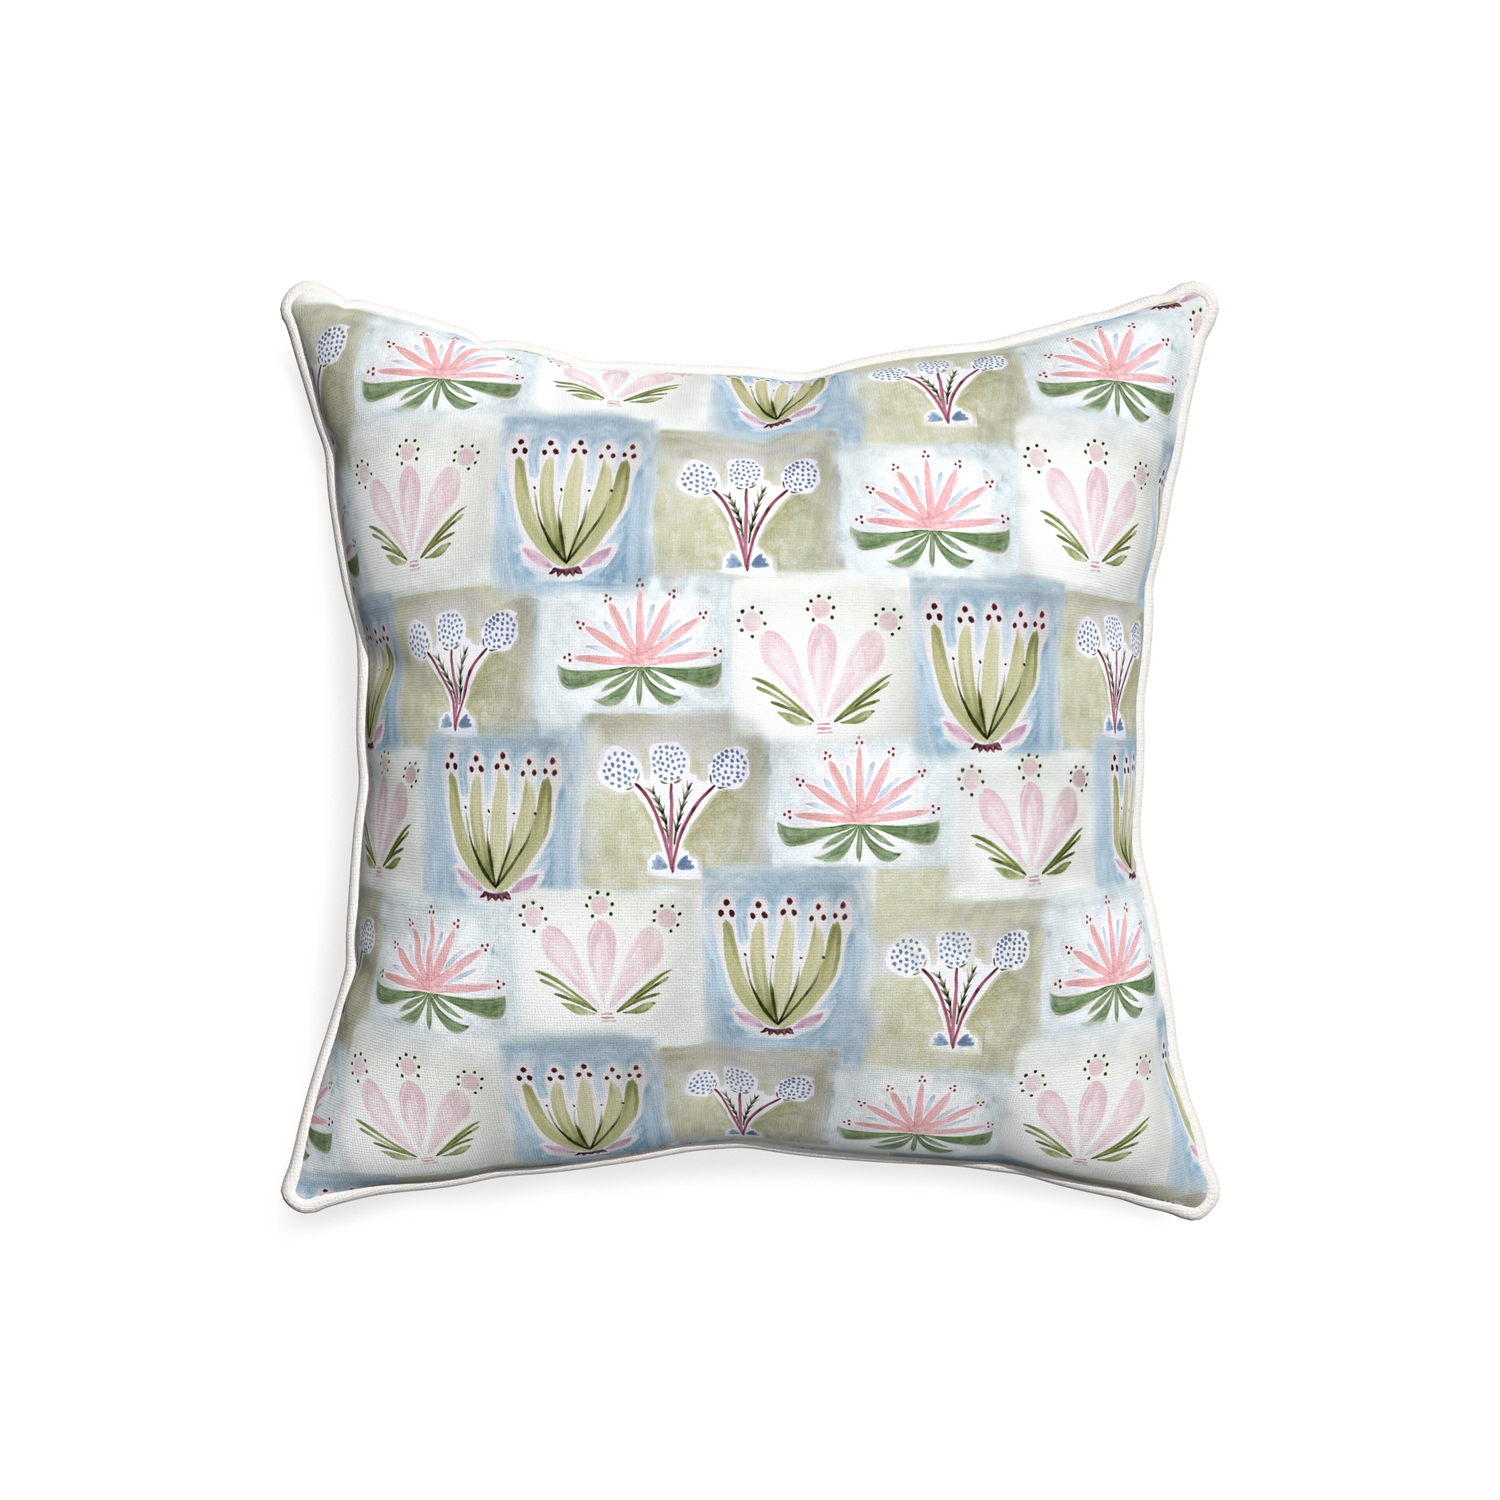 20-square harper custom hand-painted floralpillow with snow piping on white background